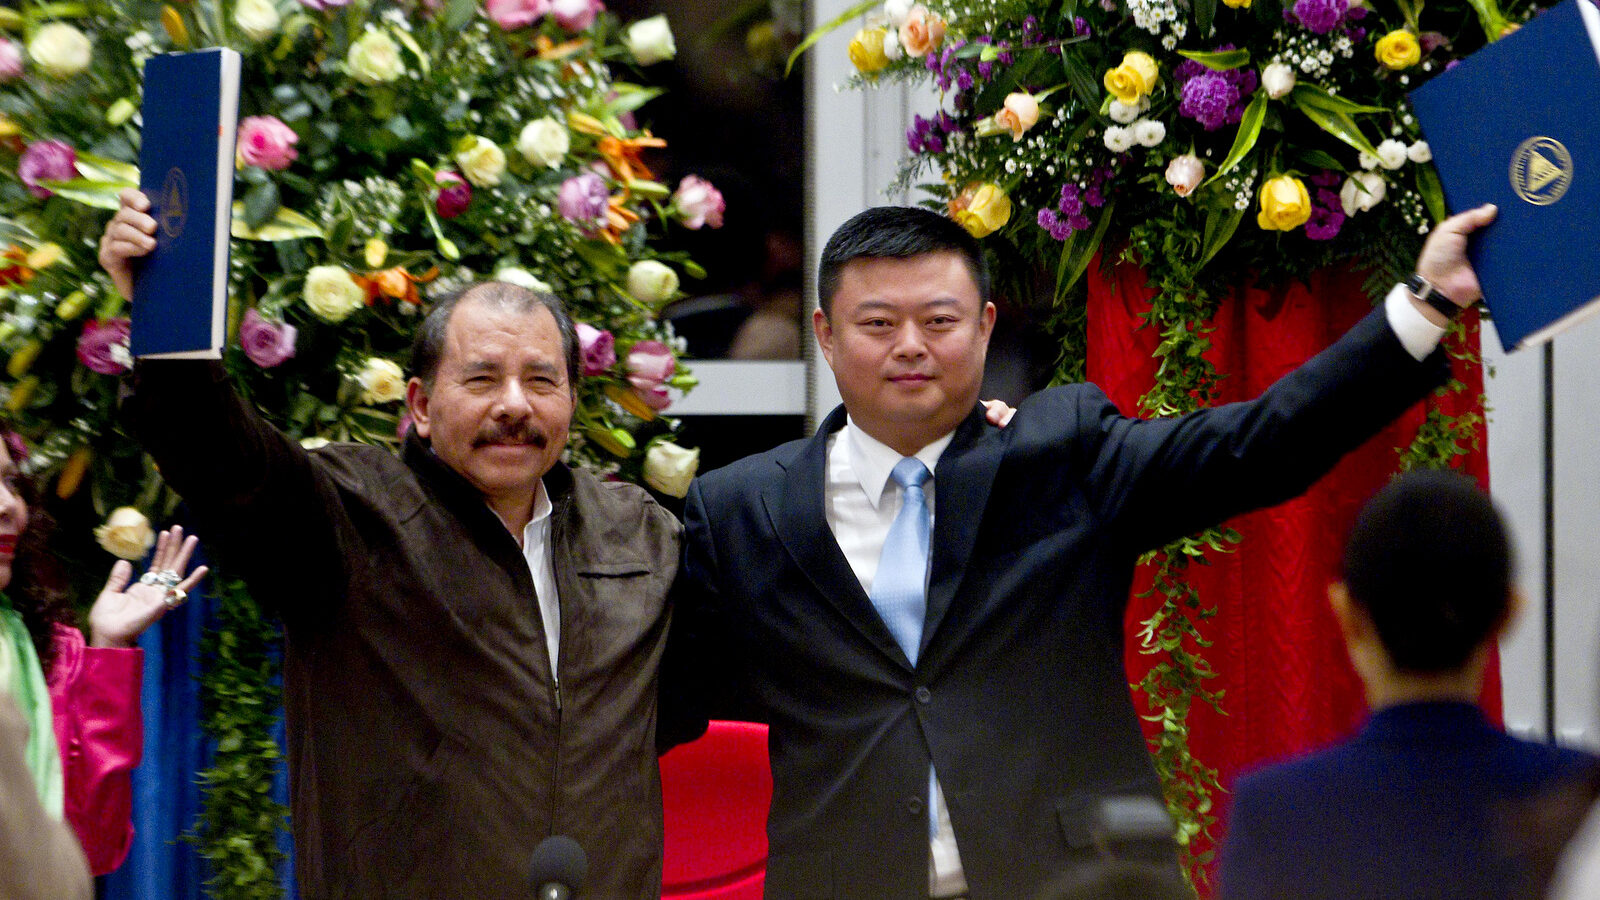 In this June 14, 2013 file photo, President Daniel Ortega, left, and Chinese businessman Wang Jing hold up a concession agreement for the construction of a multibillion-dollar canal at the Casa de los Pueblos in Managua. (AP Photo/Esteban Felix)